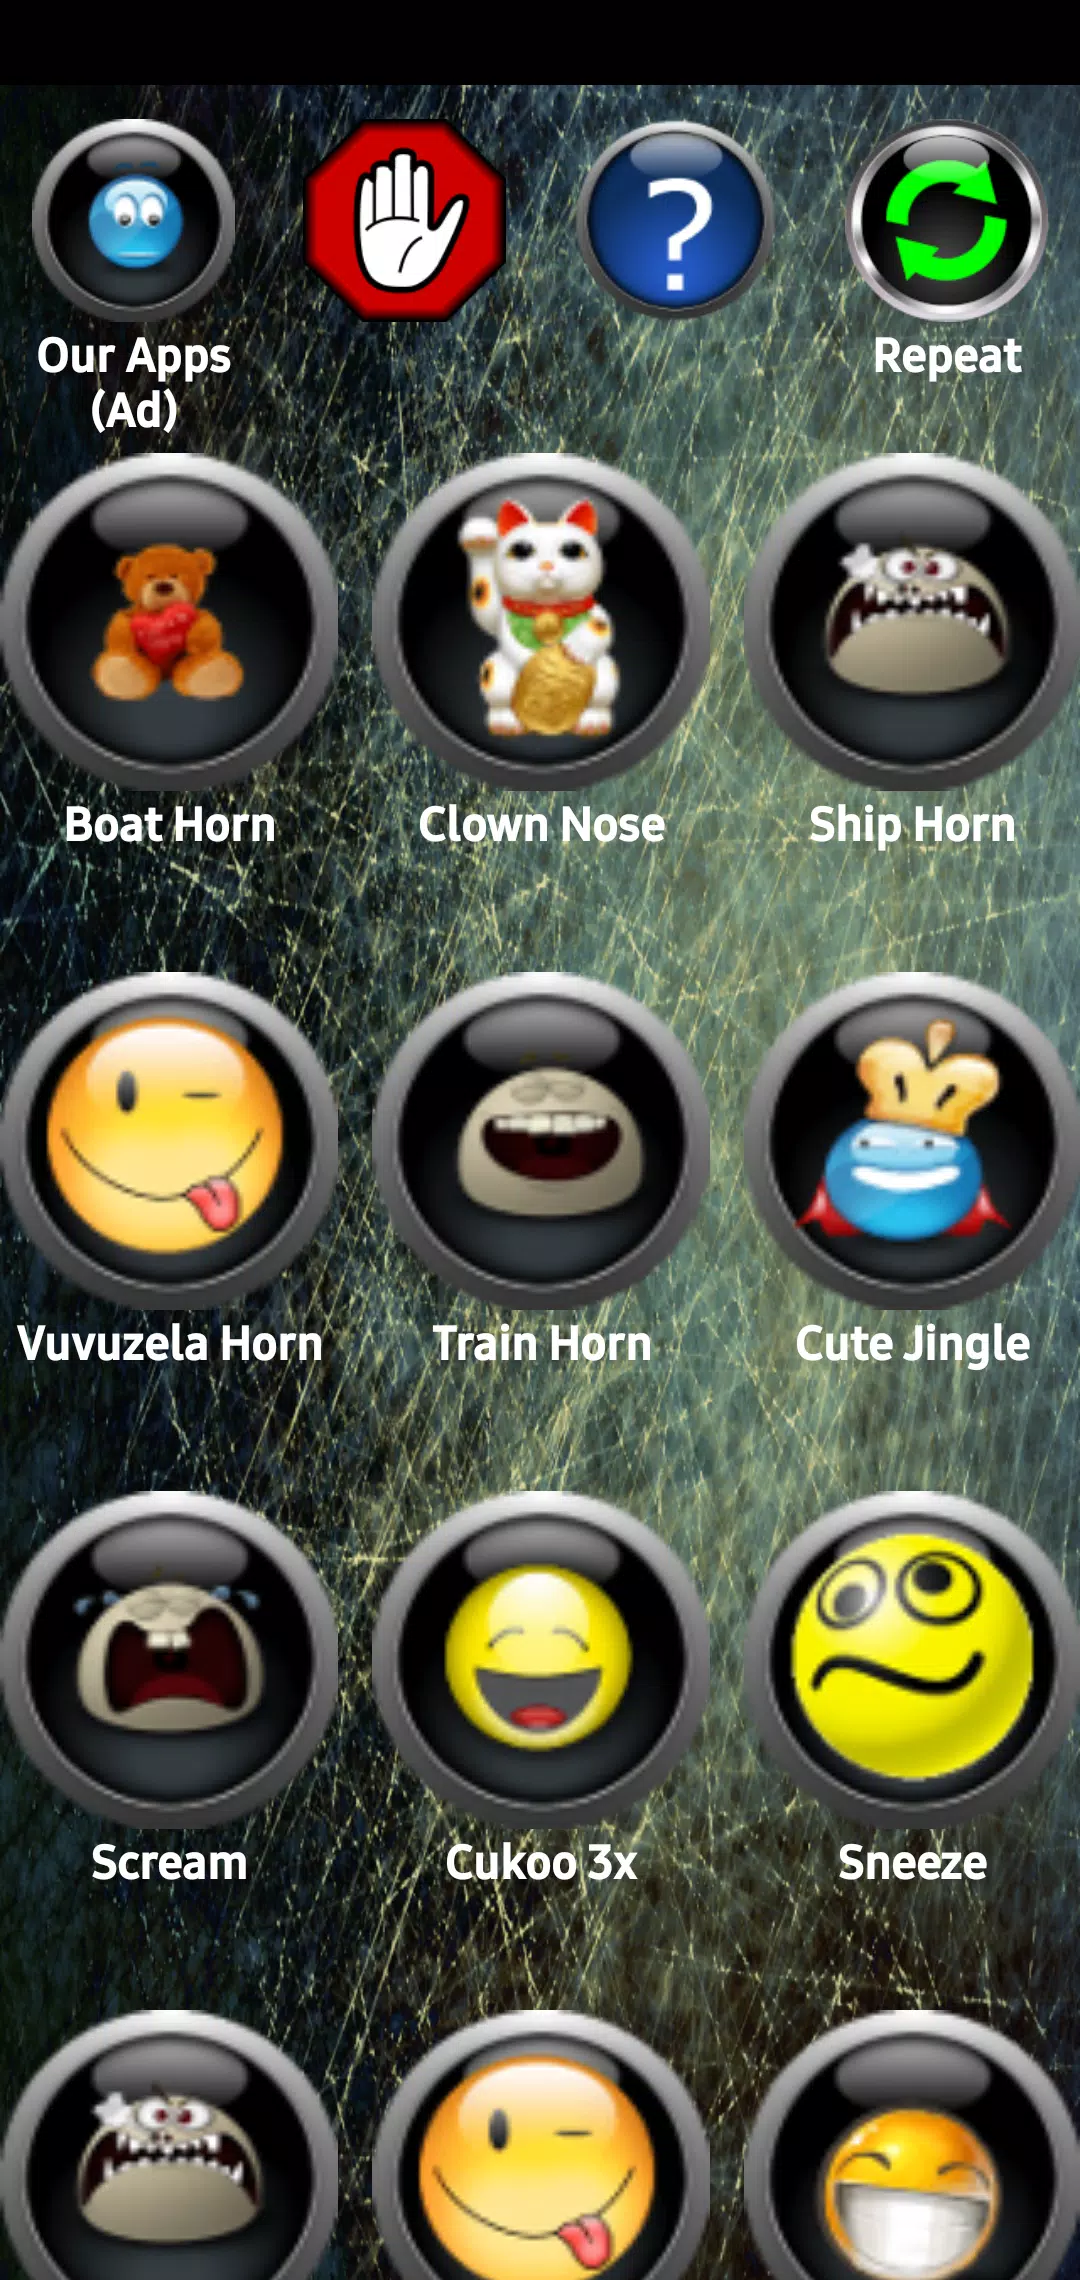 Funny SMS Ringtones APK for Android Download